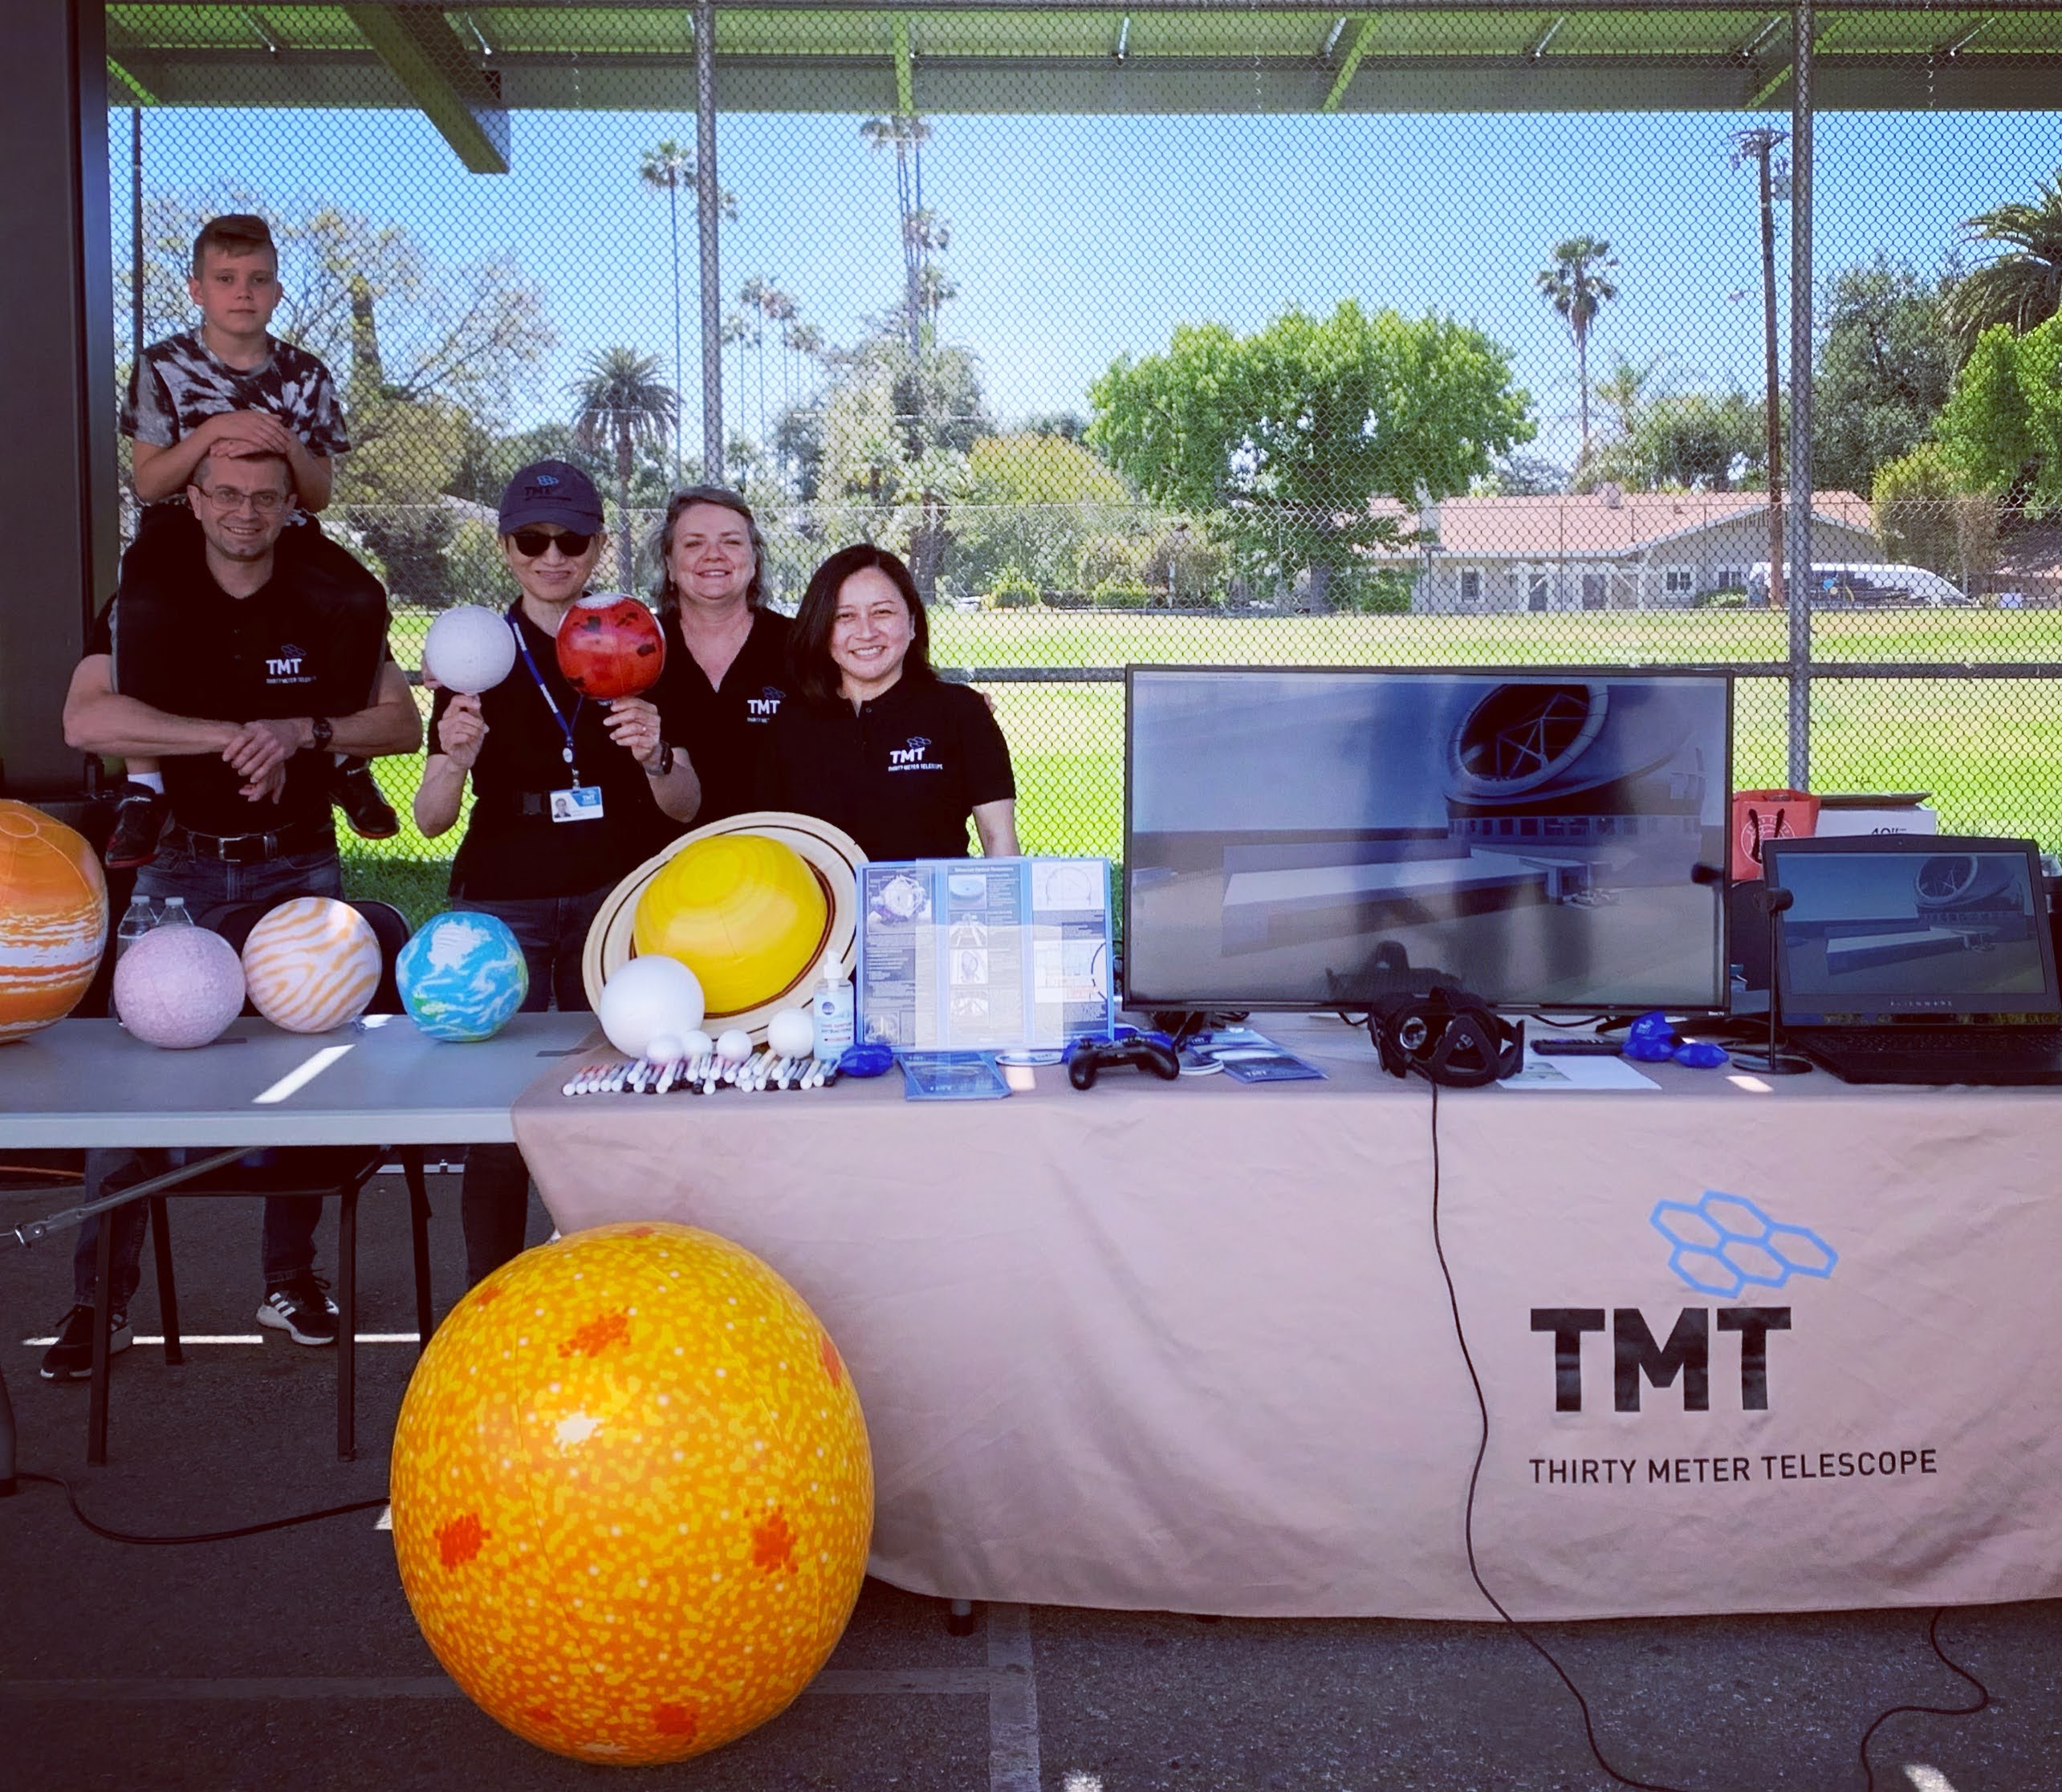 TMT’s booth at the Eliot Arts Magnet School Science Festival in Altadena on April 23, 2022